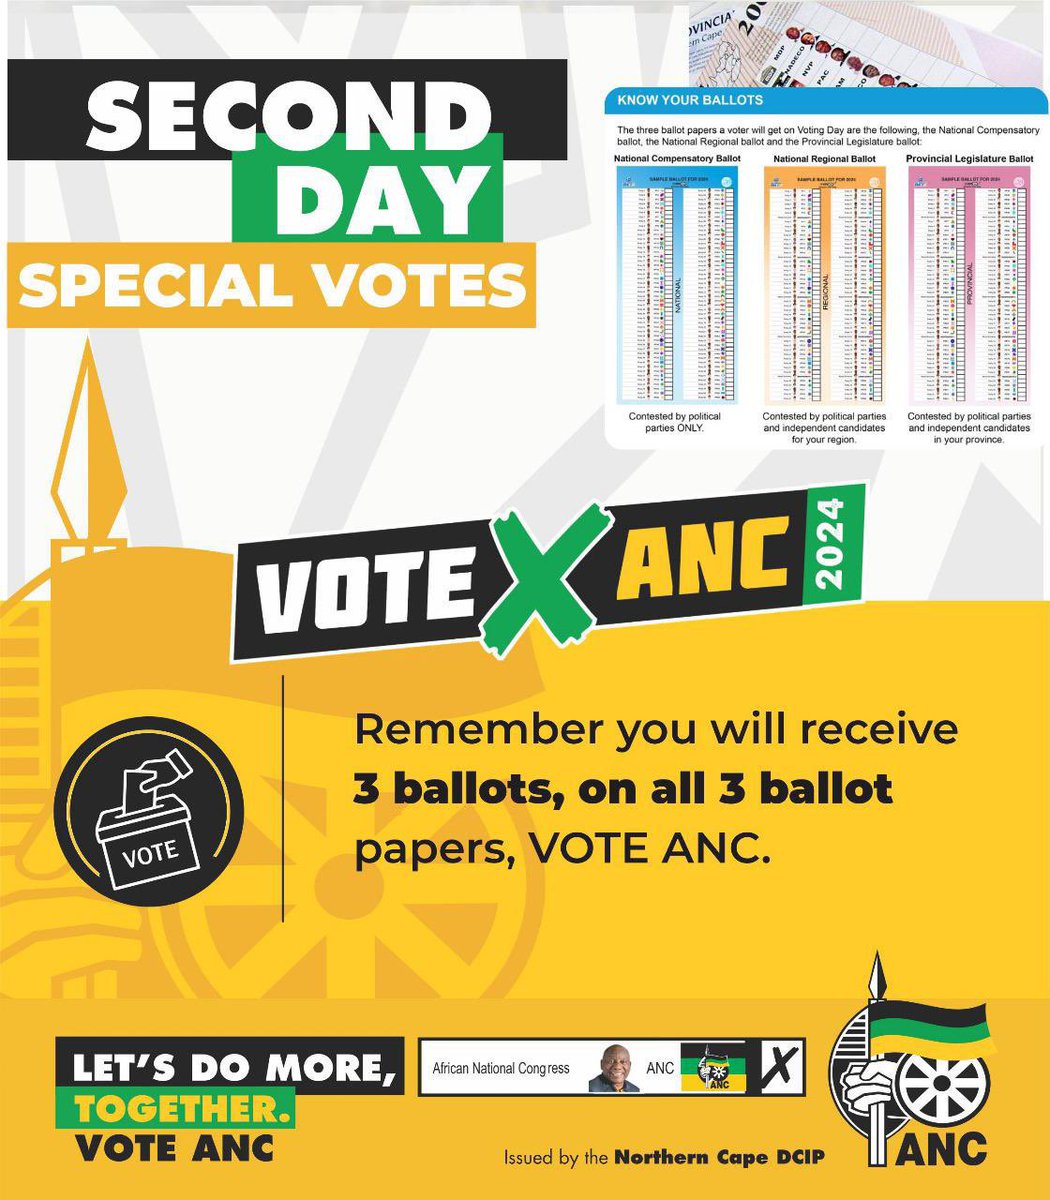 DAY 2 - SPECIAL VOTES All voters will receive 3 ballot papers at your voting station. Make sure you #VoteANC on all 3 ballot papers. Voting stations will be open from 09h00-17h00. #LetsDoMoreTogether #VoteANC2024 #IAmVotingANC